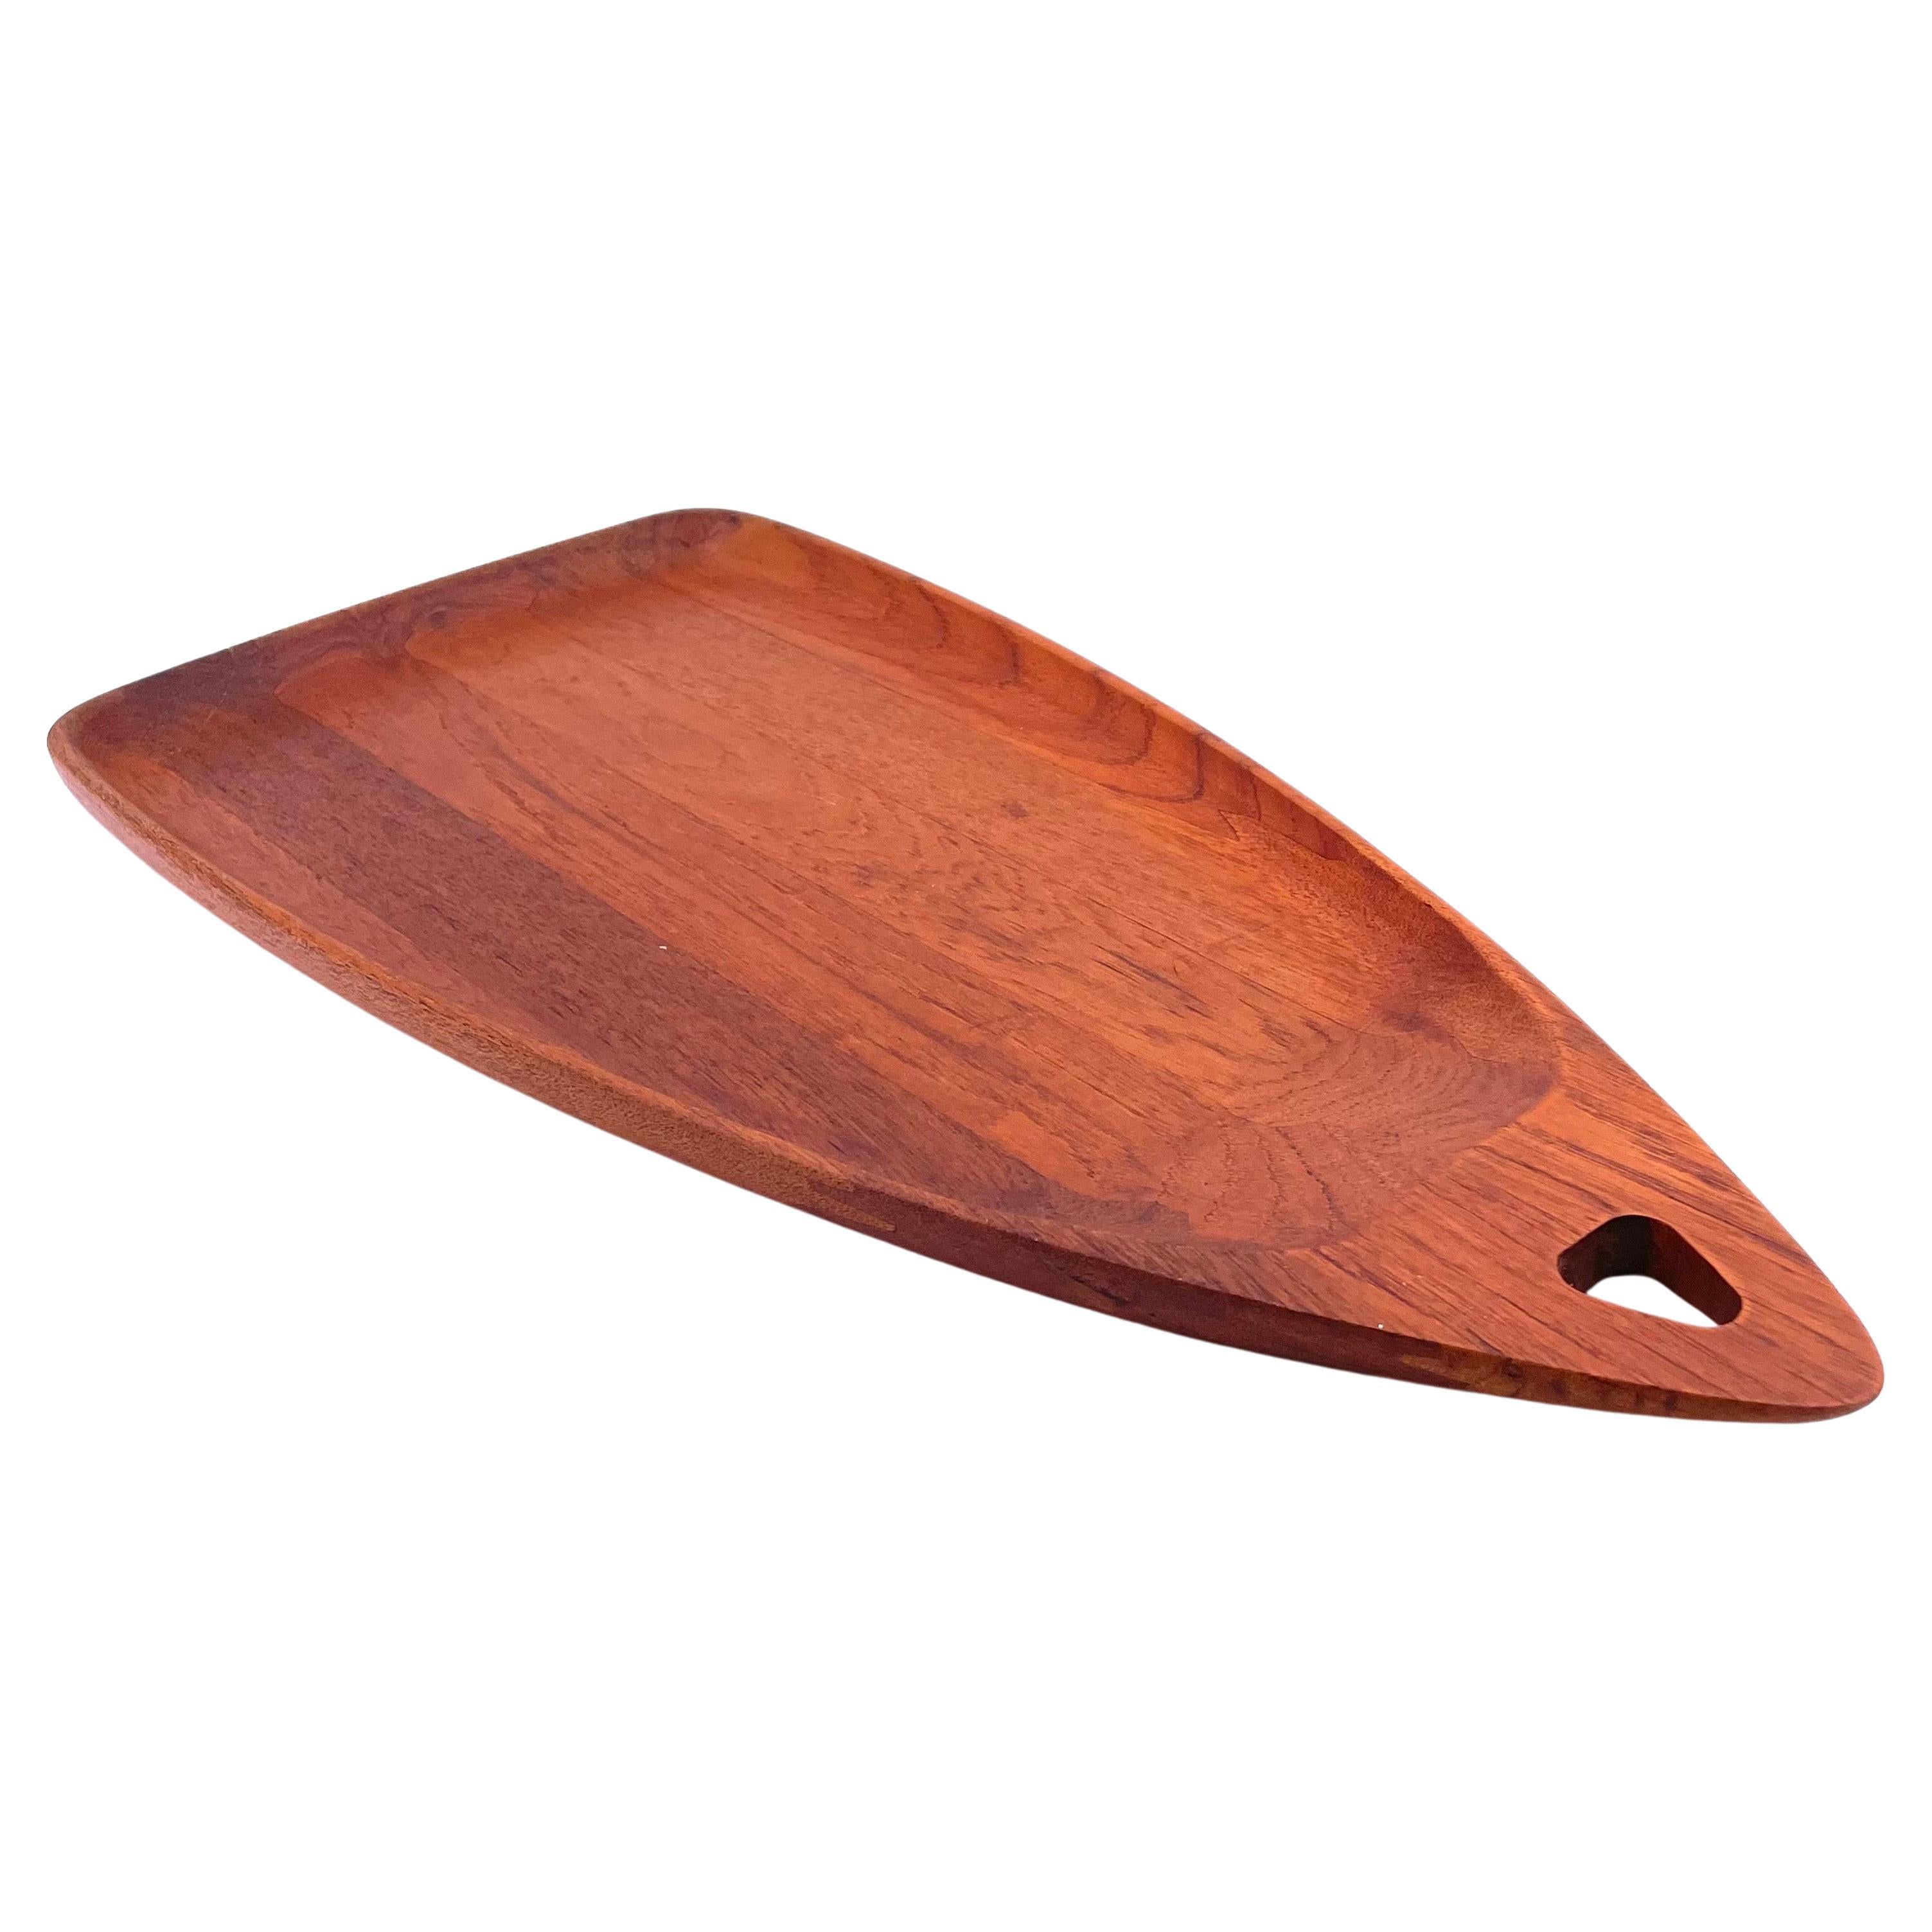 Large Rare Solid Teak Freeform Tray by Digsmed For Sale